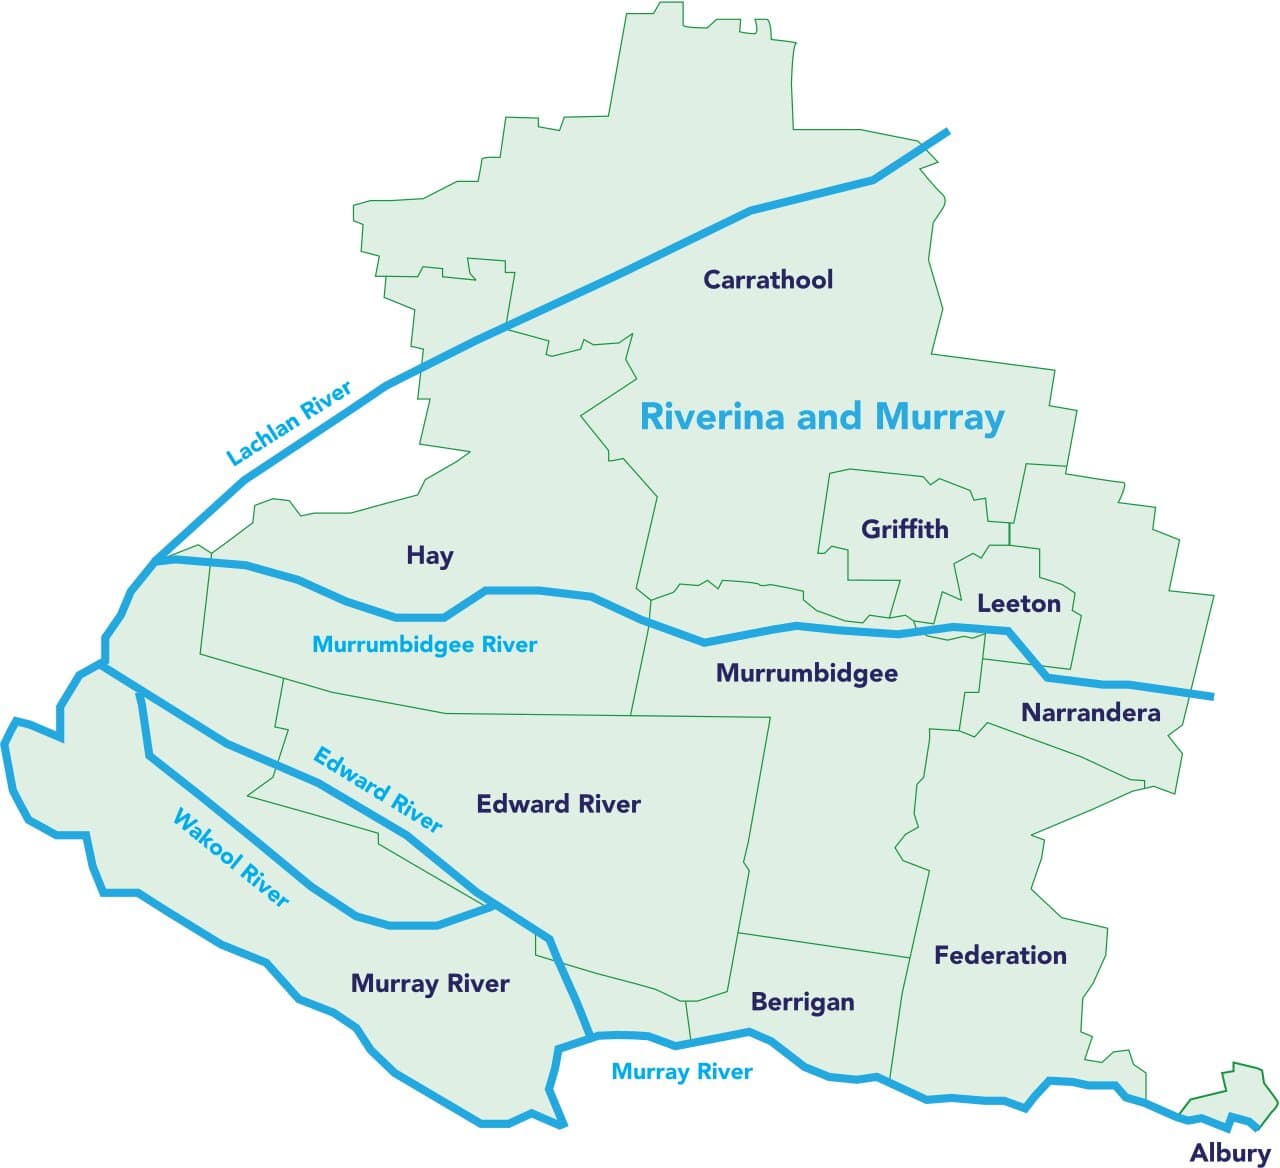 Riverina and Murray Joint Organisation